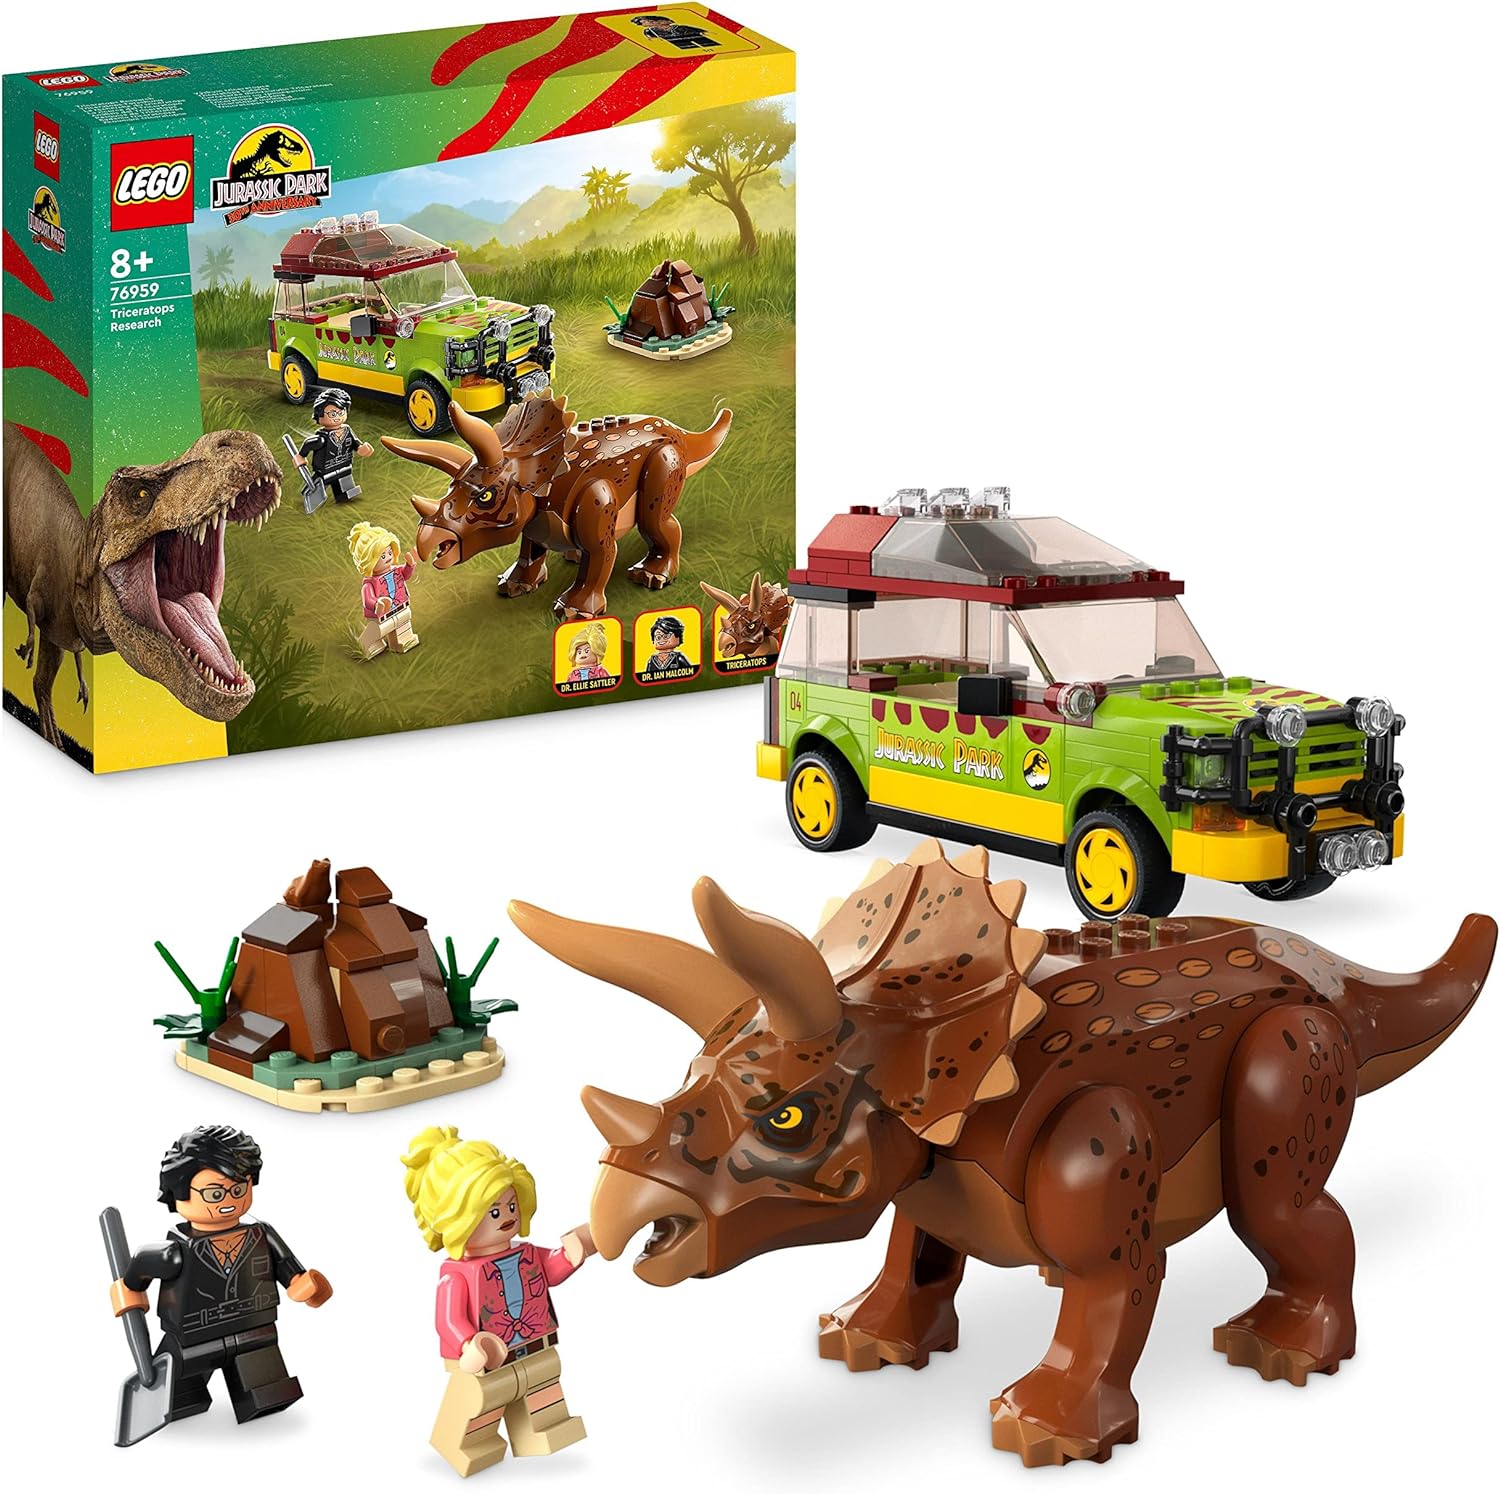 LEGO Jurassic Park Triceratops Research, dinosaurs toys with a figure and car to collect for the 30th anniversary 76959